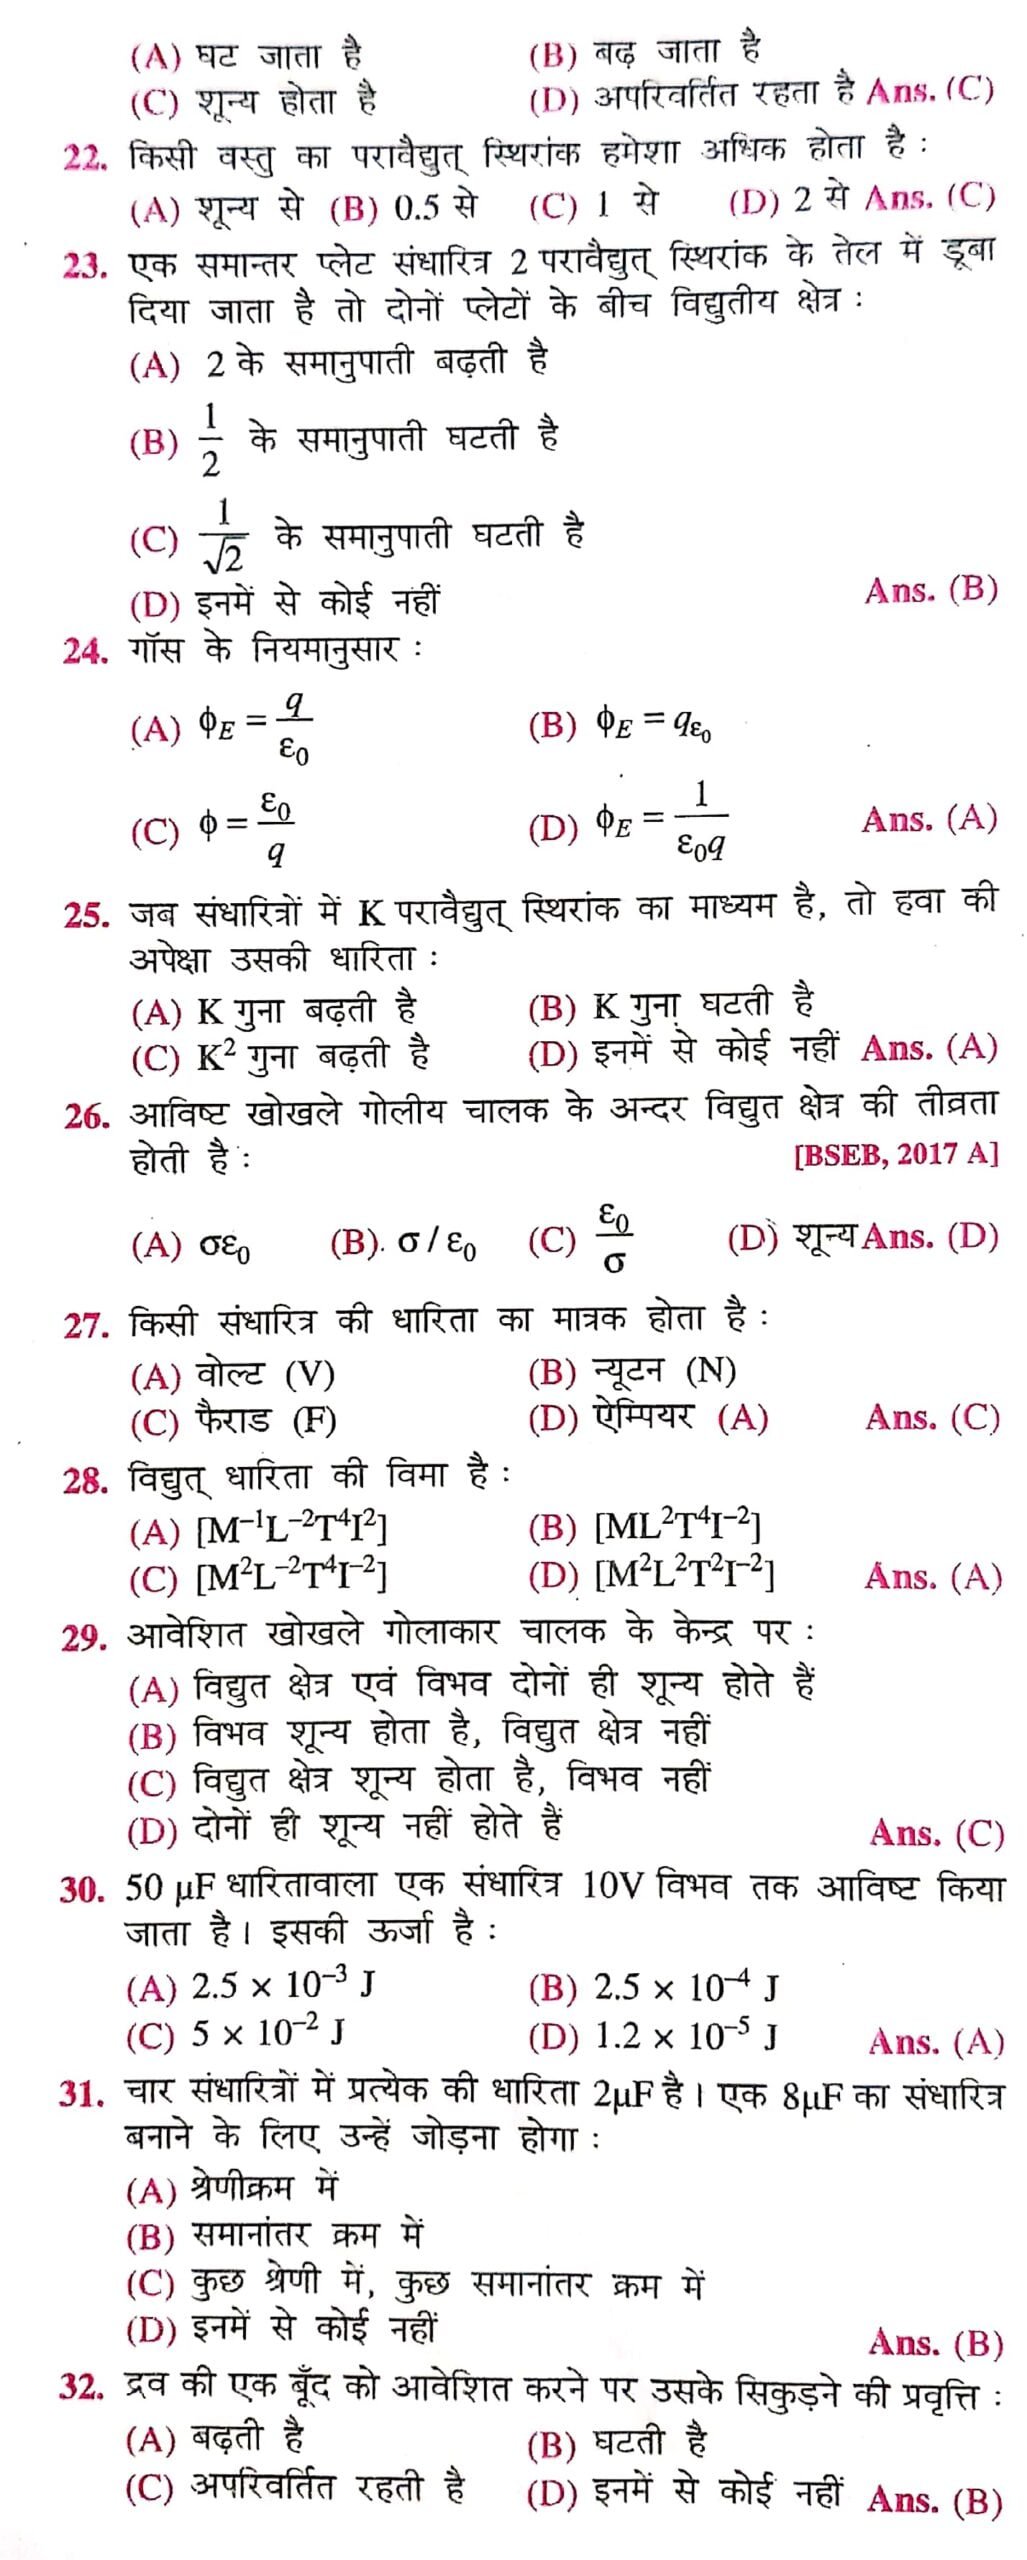 Physic Form 4 Chapter 2 - Exercises - Cloudfront.net / You can create